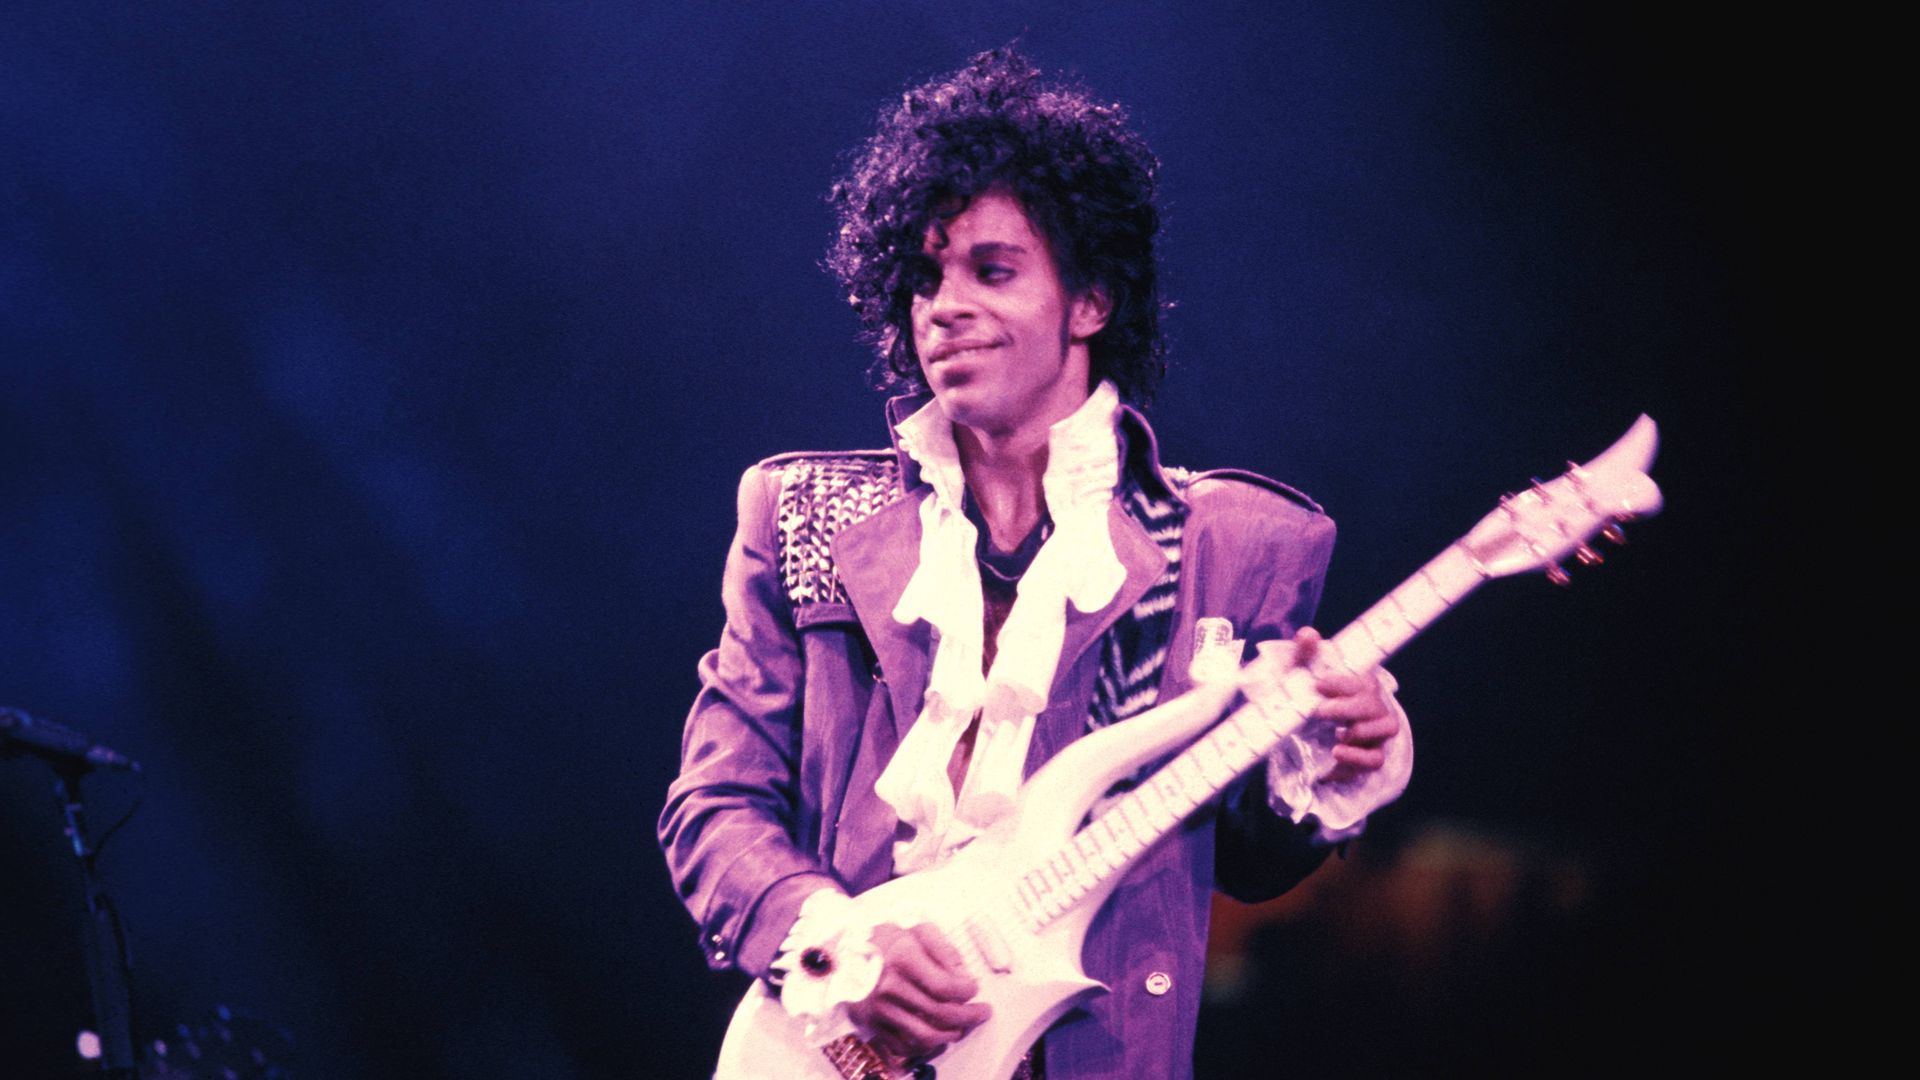 The musician Prince on stage holding a guitar.